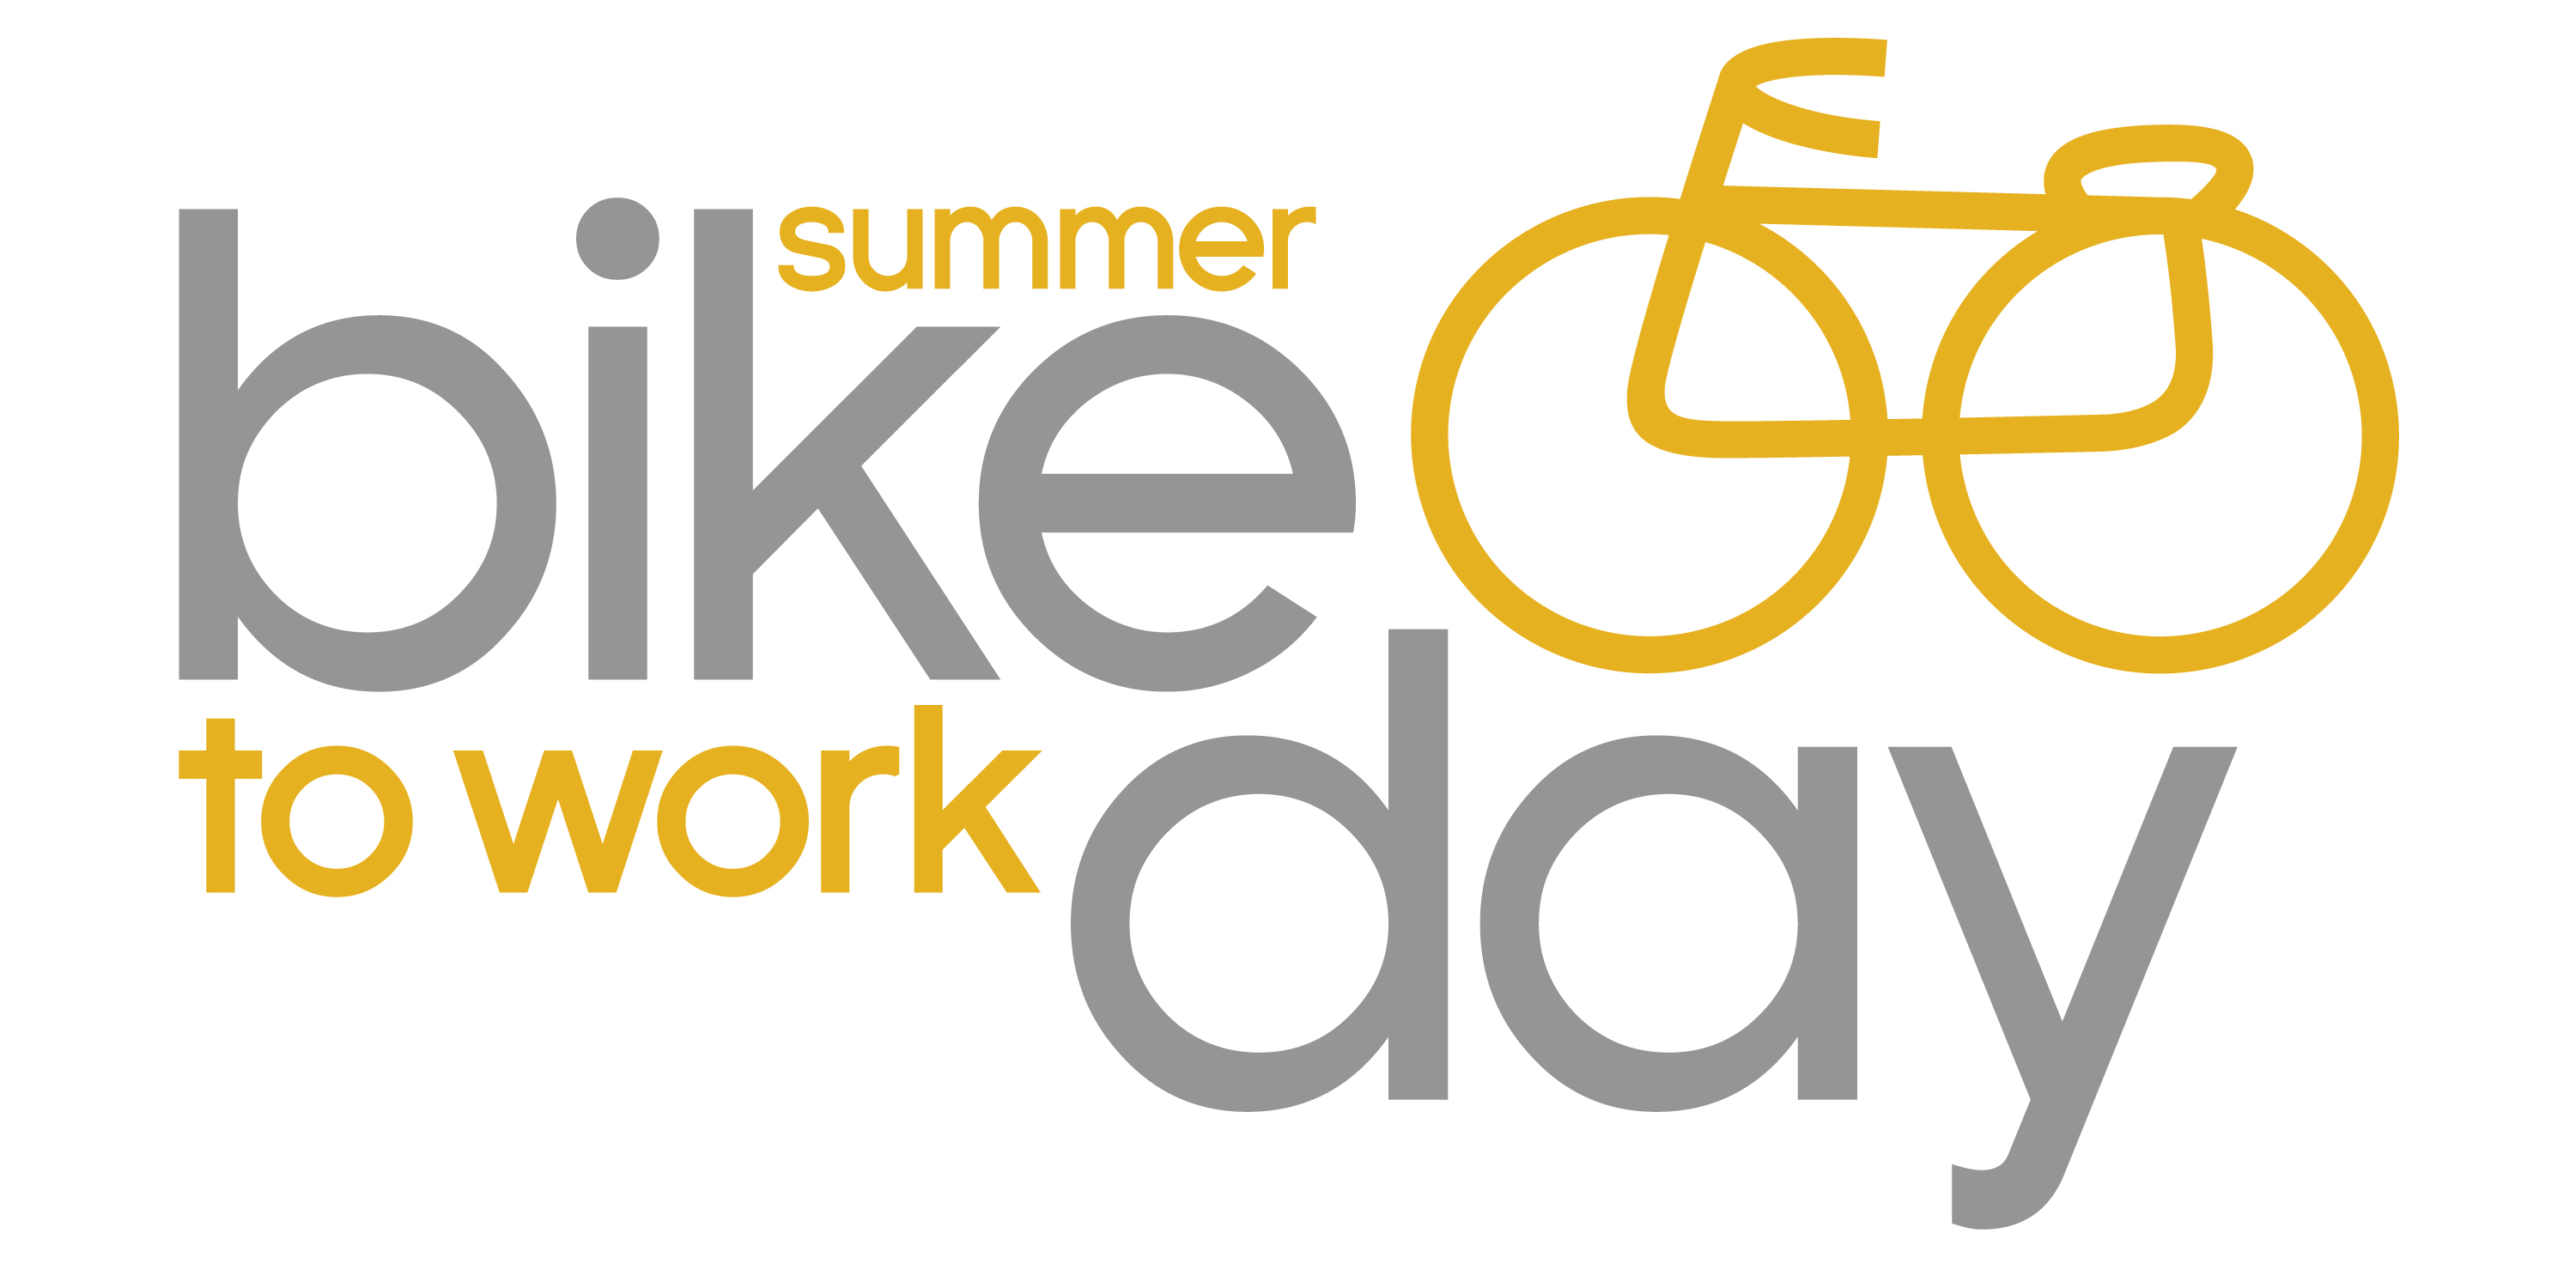 Fort Collins, CO and Loveland, CO bike to work day